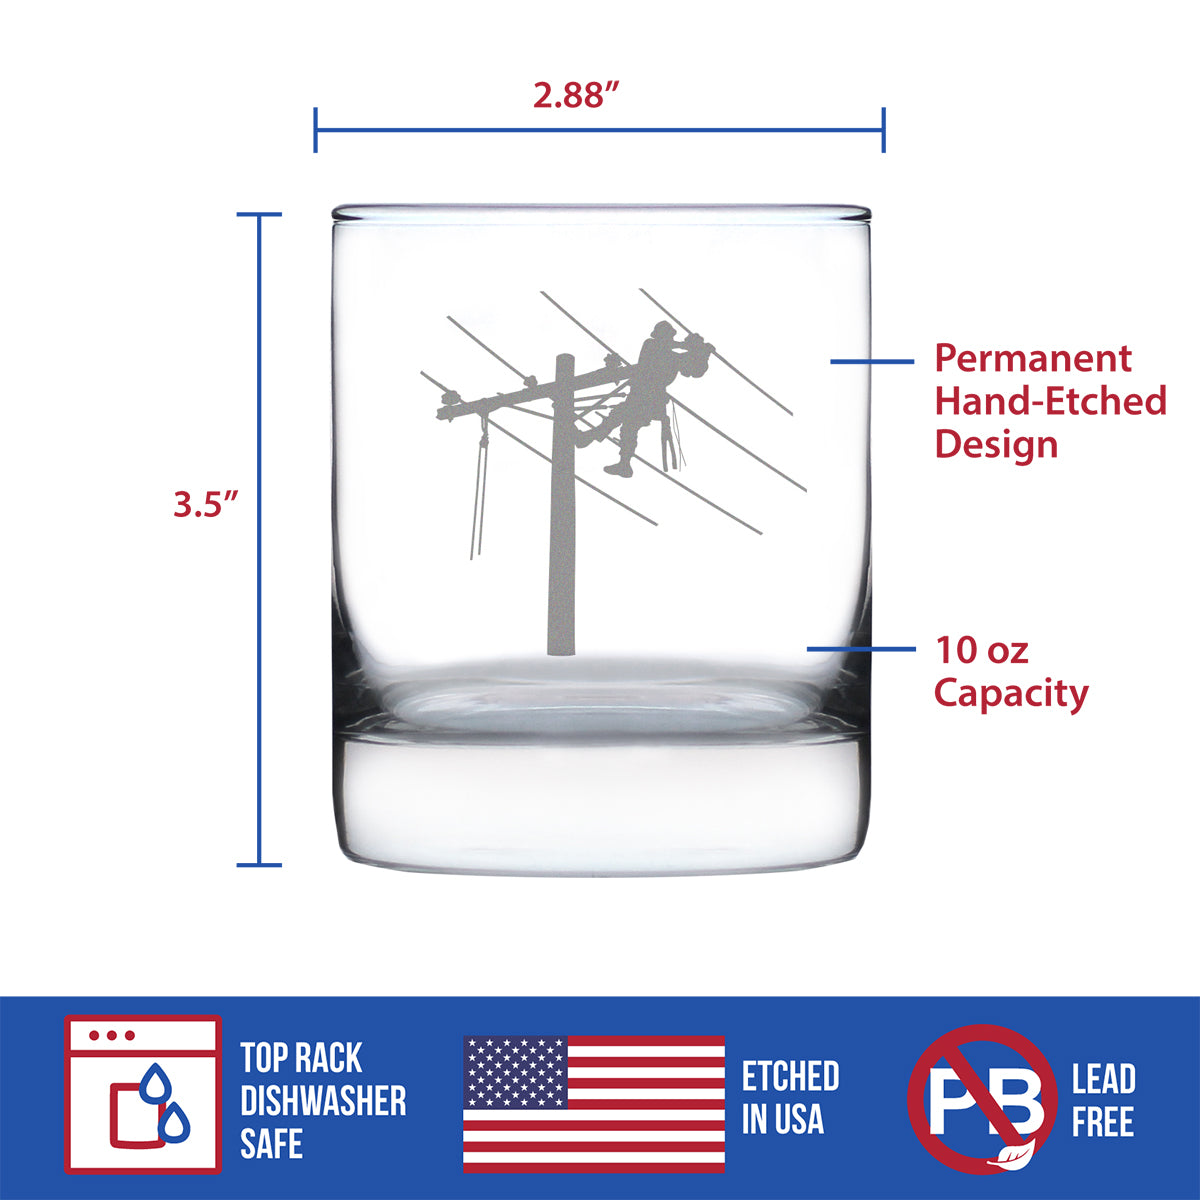 Lineworker Engraved Rocks or Old Fashioned Whiskey Glass, Unique Electrical Themed Gifts for Men and Women who are Lineworkers - 10 oz